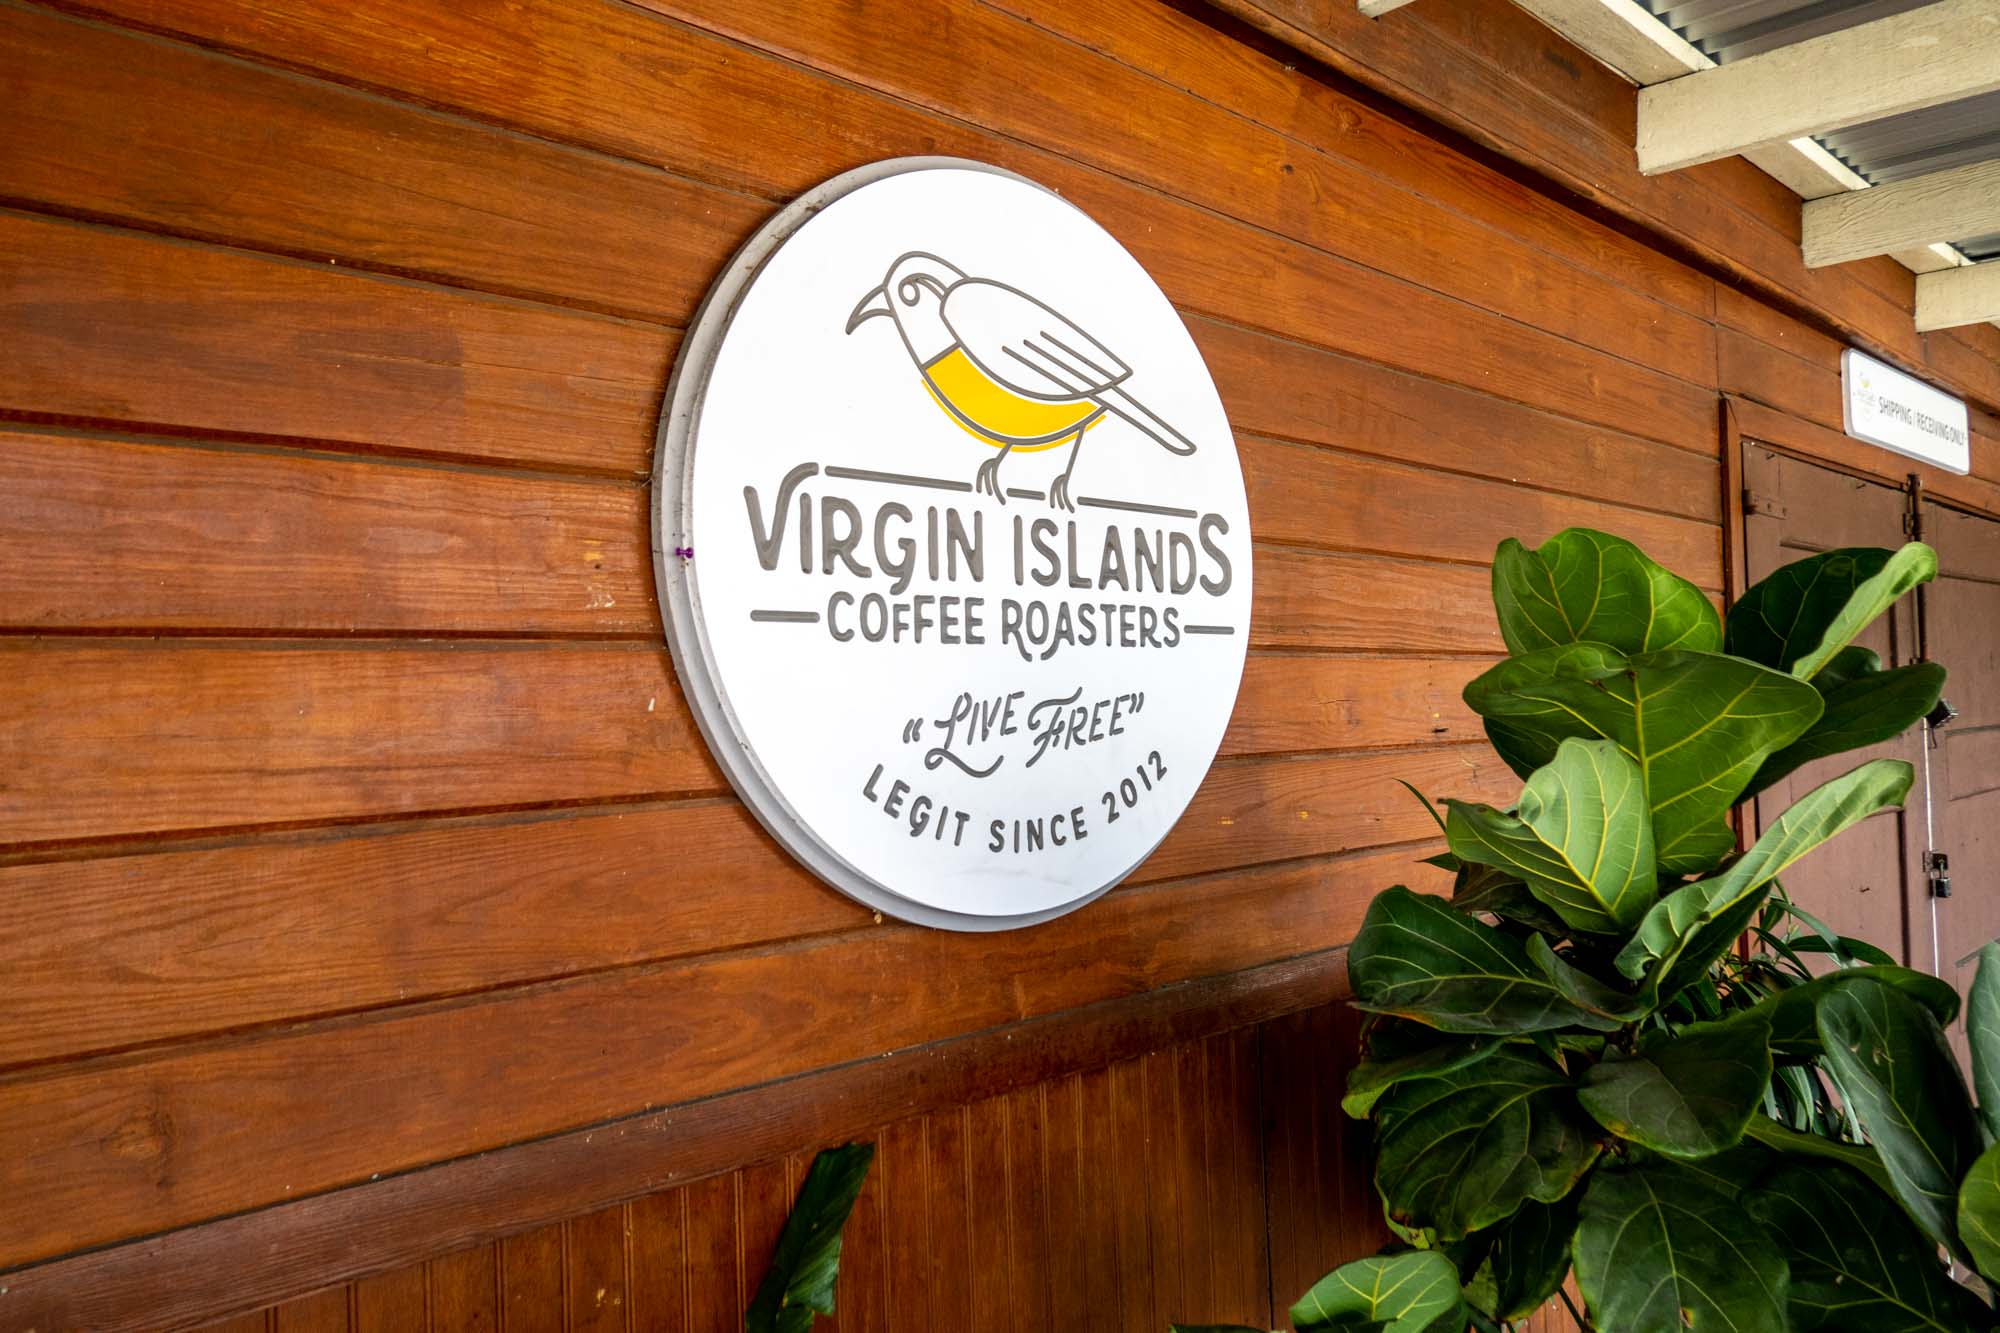 White circular sign with a bird: "Virgin Islands Coffee Roasters, Live Free, Legit Since 2012"